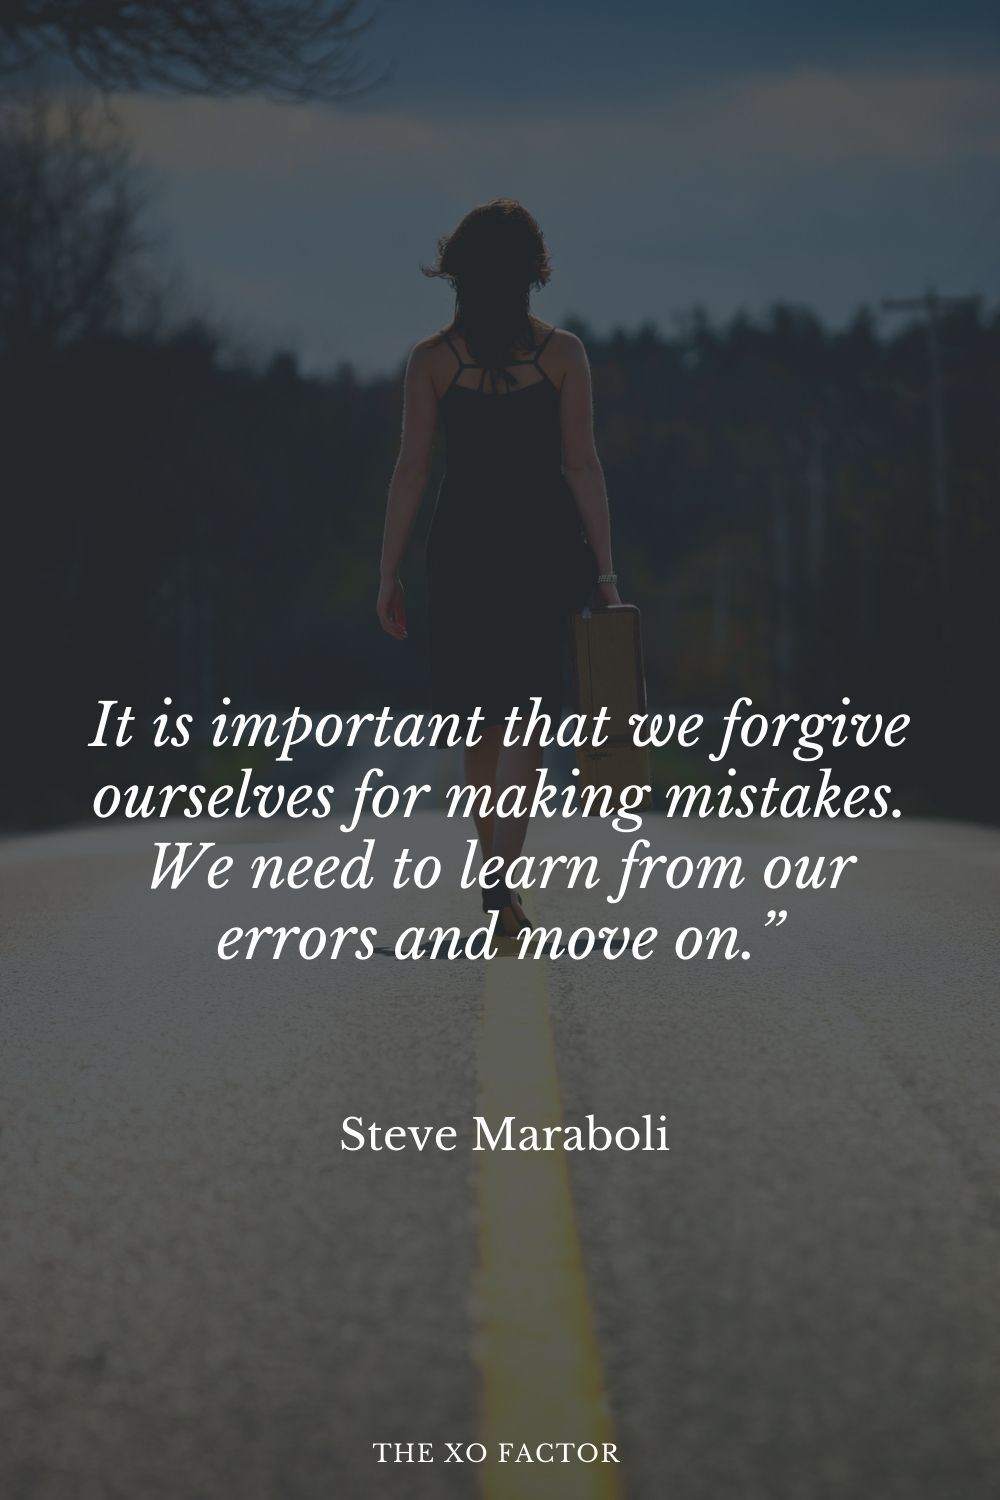 It is important that we forgive ourselves for making mistakes. We need to learn from our errors and move on.” Steve Maraboli